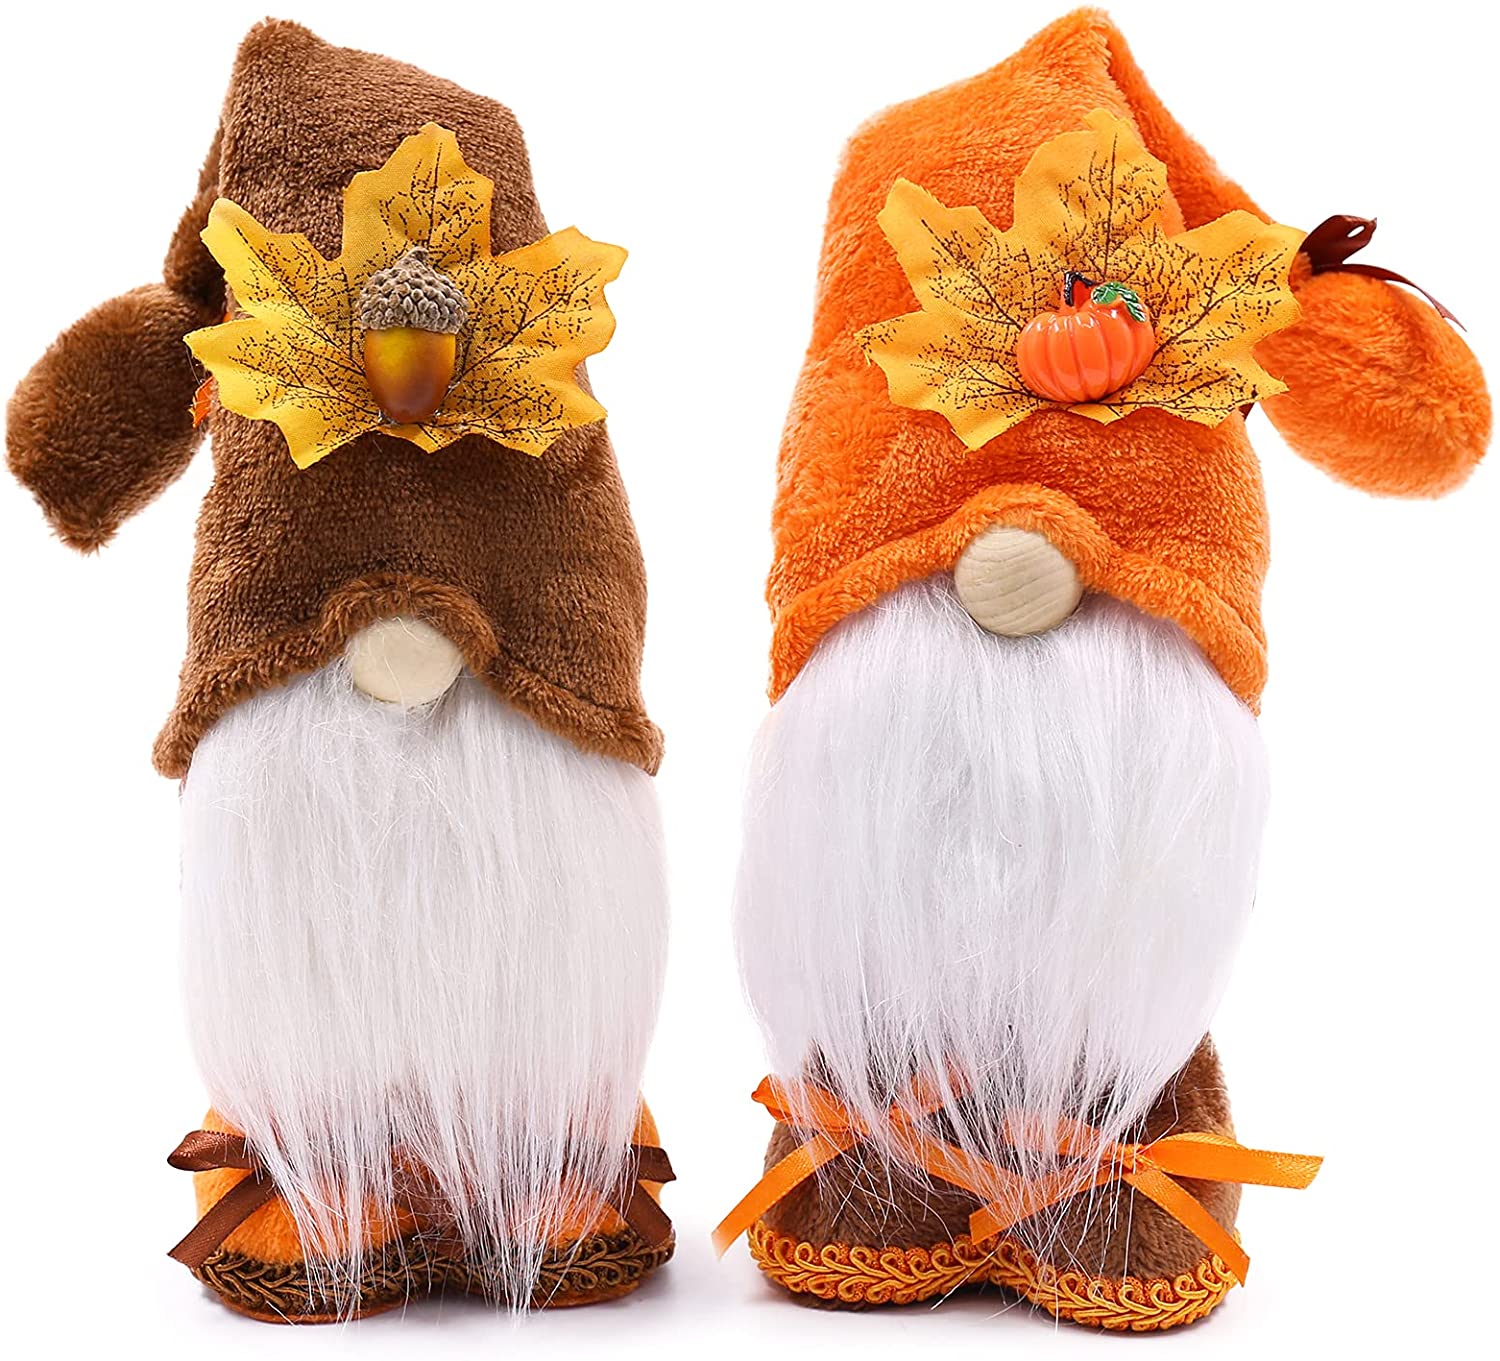 Fall Gnomes Decorations Autumn Harvest Farmhouse Tiered Tray Decor Thanksgiving Day Gift Idea Handmade Shelf Sitters Tomte Swedish Gnome Nisse Scandinavian Elf Dwarf Home Ornaments Set of 2, Home